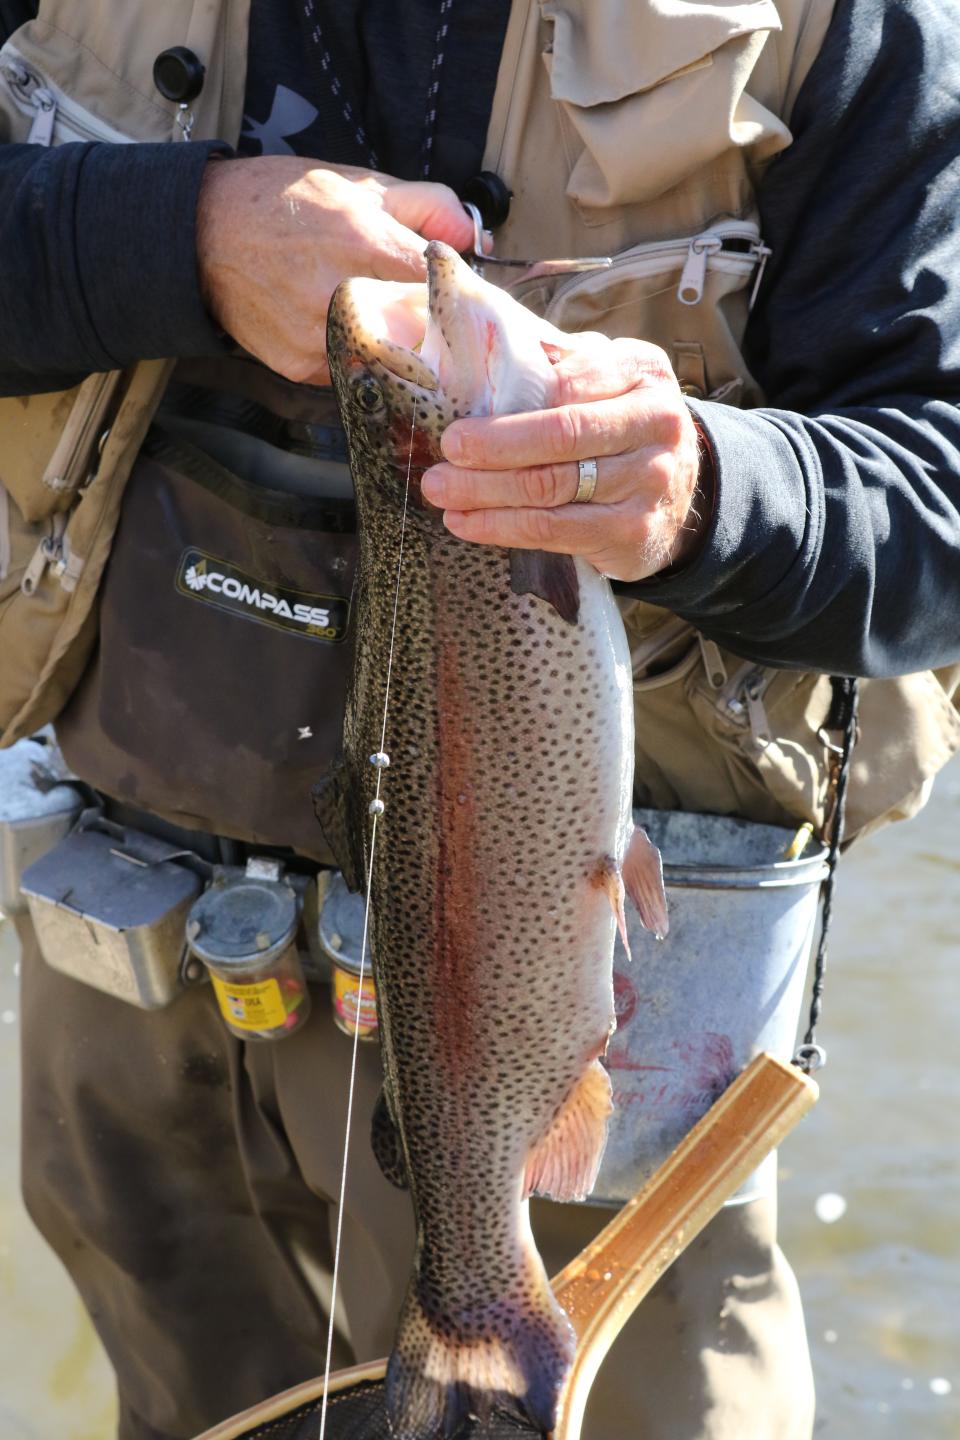 Scott Farrar of Hawthorne pulls in a large rainbow trout in the early morning on the Ramapo River in Mahwah, on opening day of fishing season, near Camp Glen Gray on April 6, 2019.